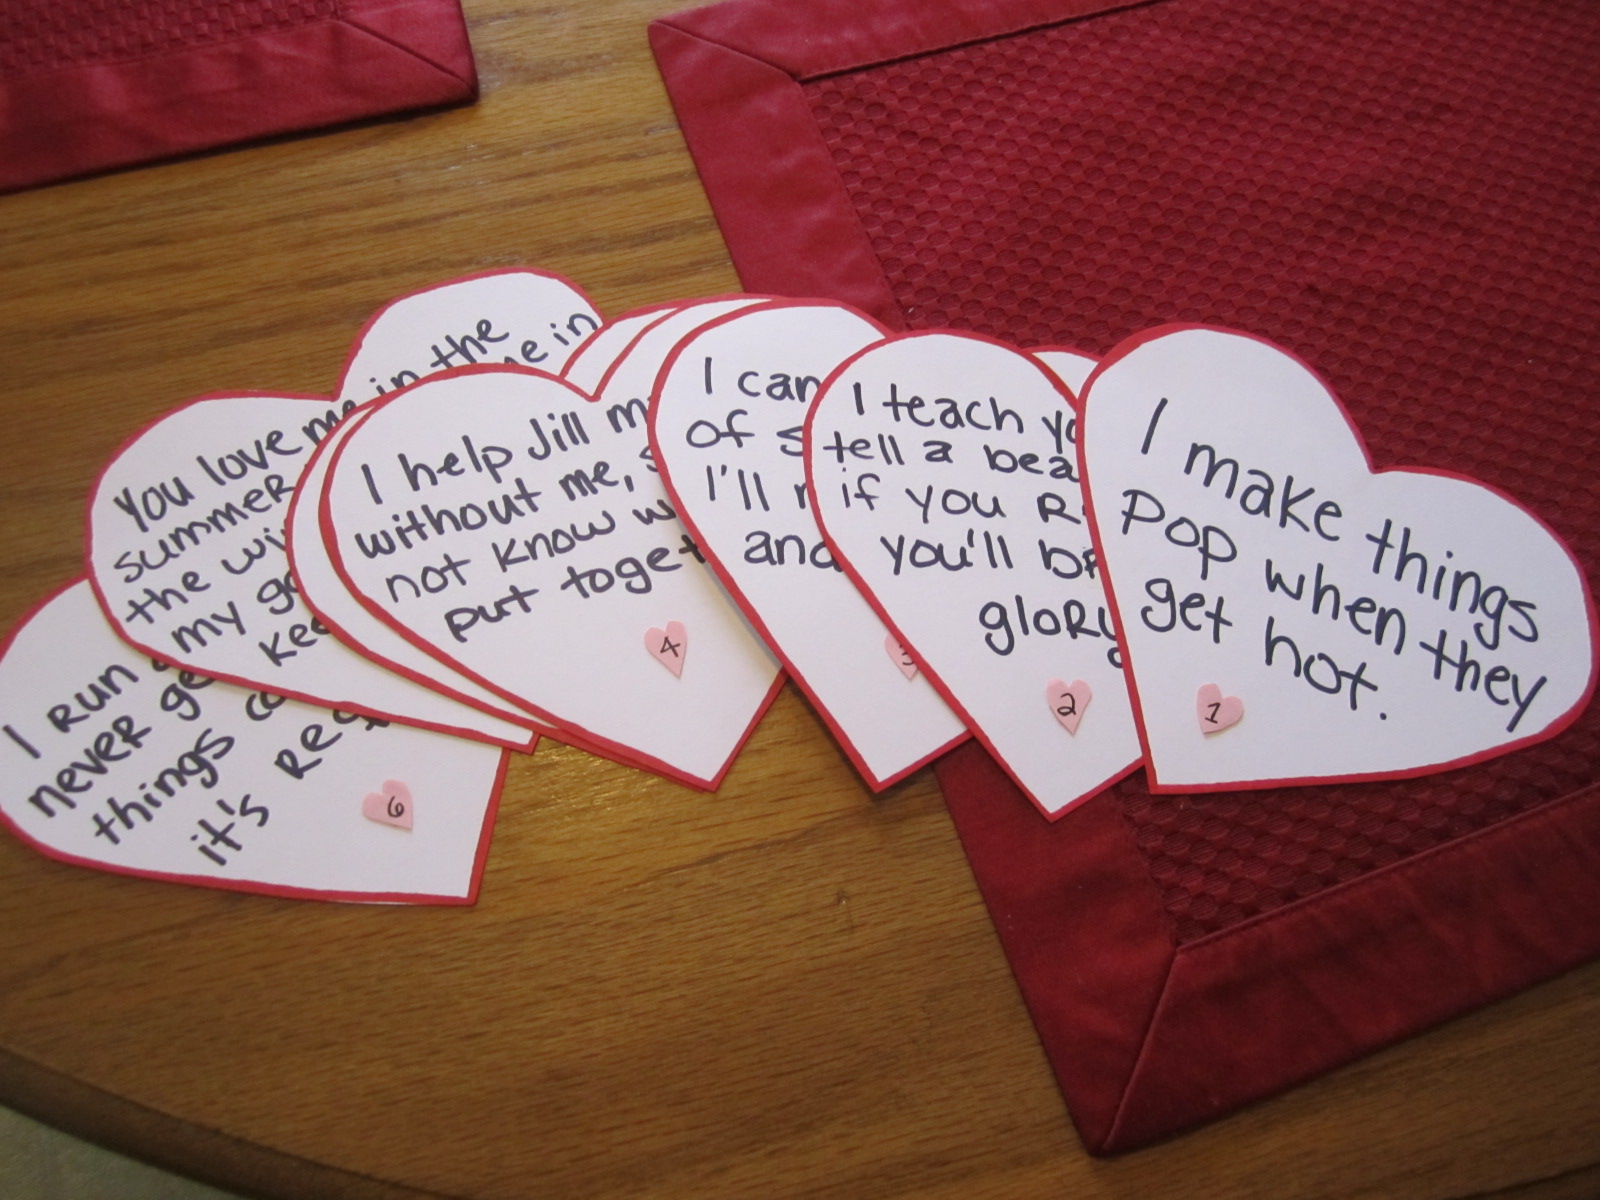 Handmade Valentine's Day Gifts you can DIY or Buy